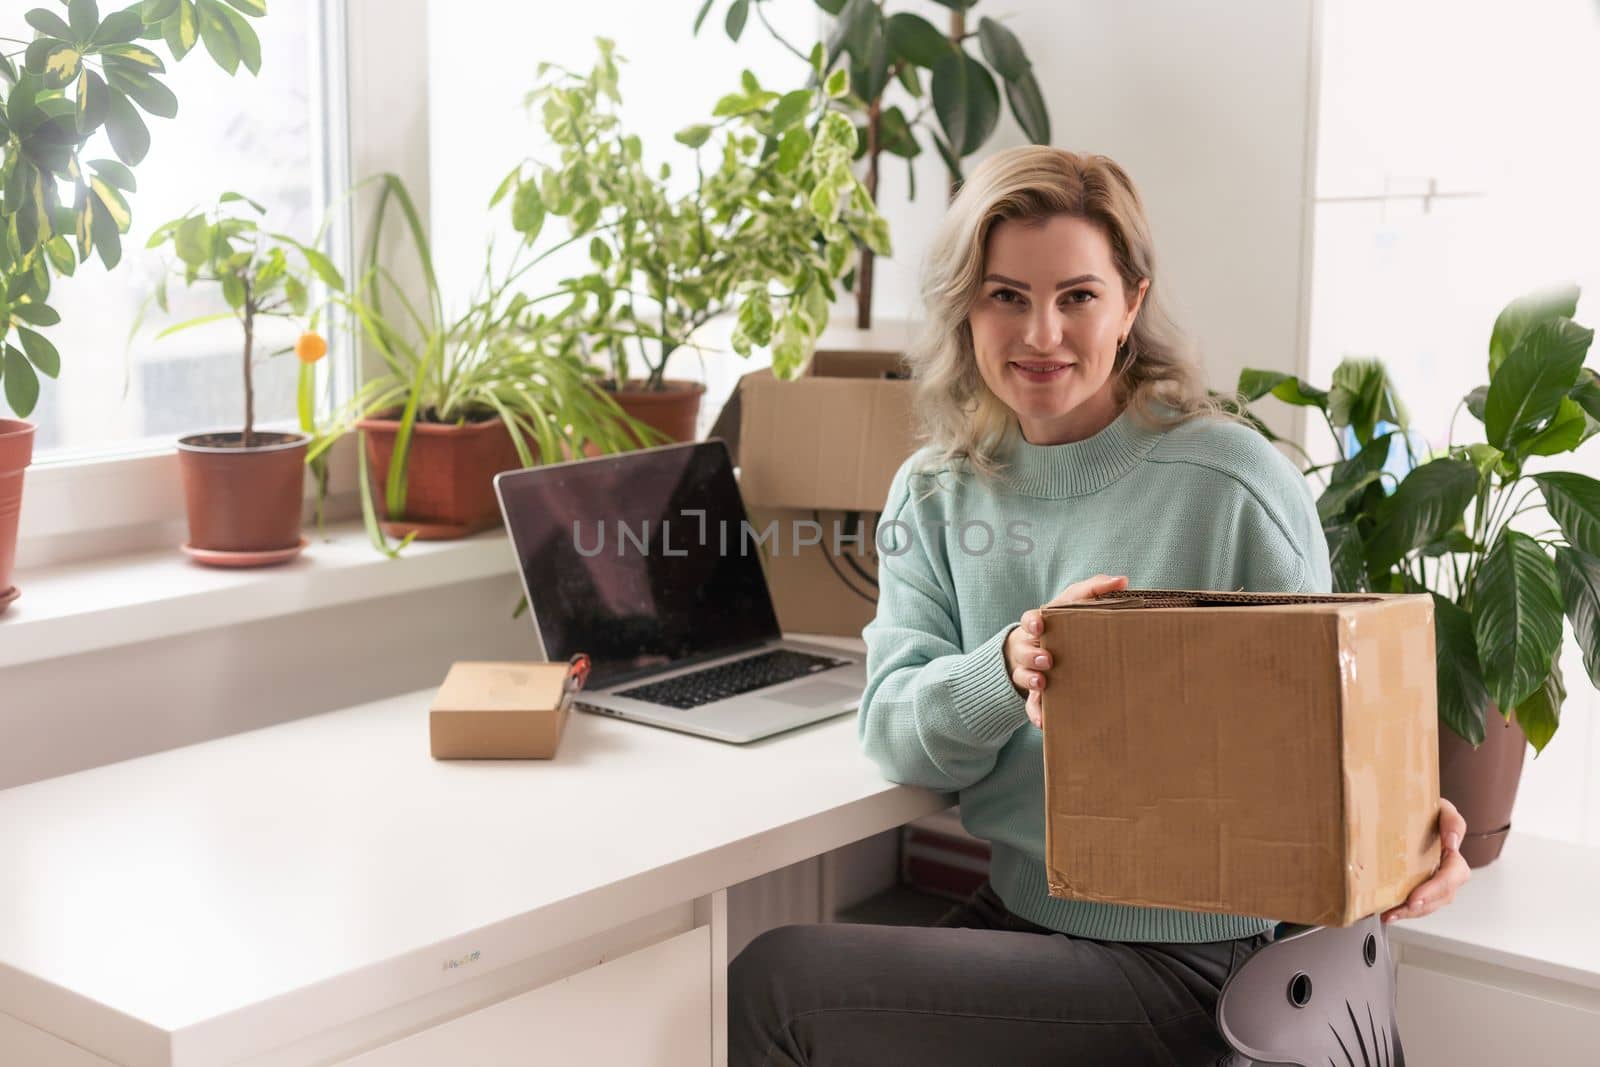 Small start-up business owners are packing boxes. To deliver to customers, salespeople, check production orders. Pack products, send to customers, sell ecommerce delivery ideas.